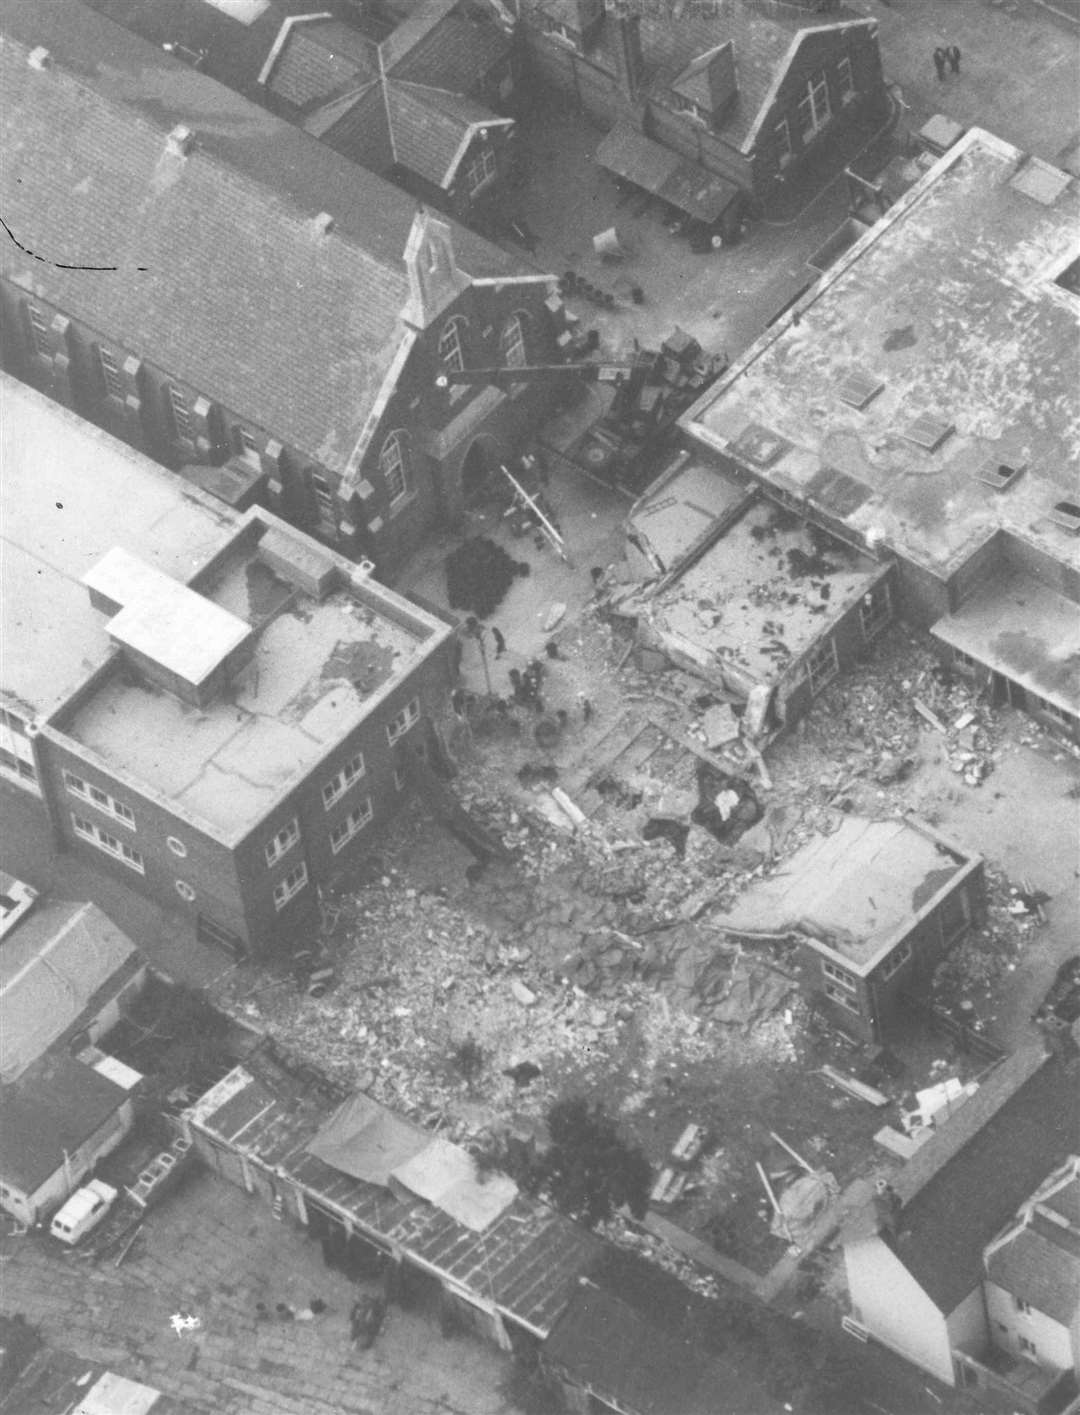 The extent of the devastation caused by the IRA bomb in Deal in 1989 is revealed from above